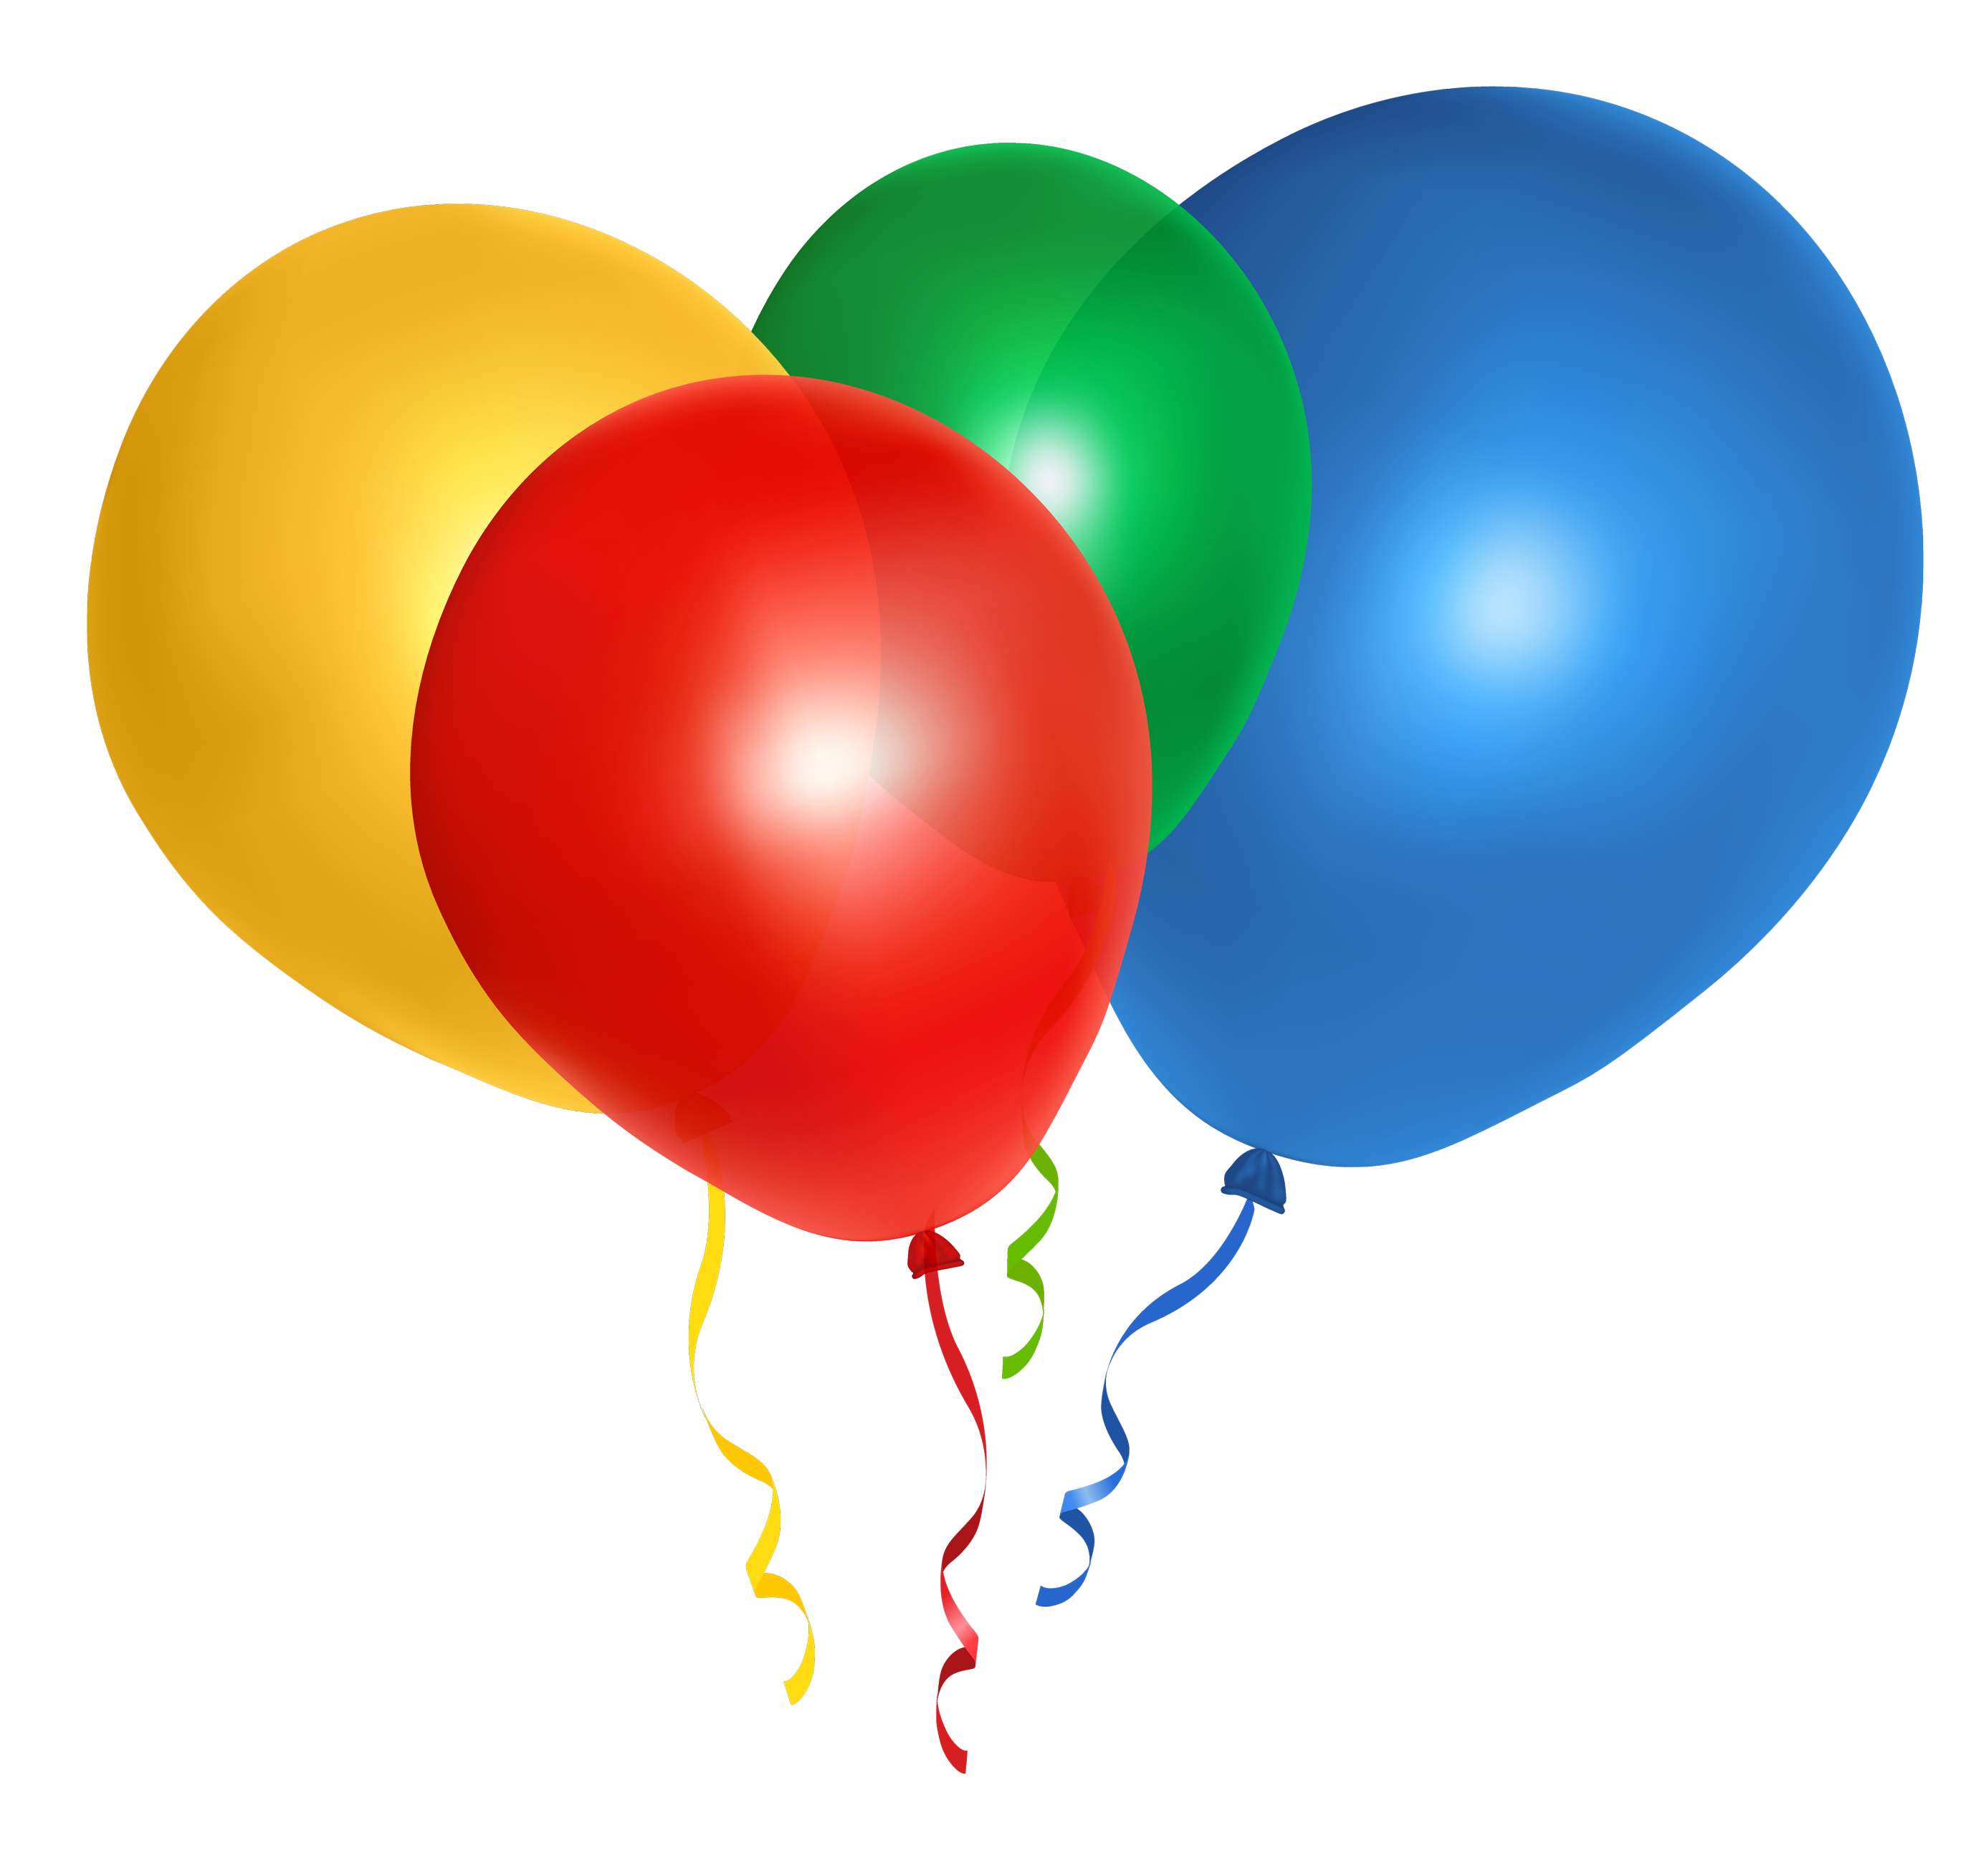 Baloon PNG HD Transparent Baloon HD.PNG Images. | PlusPNG